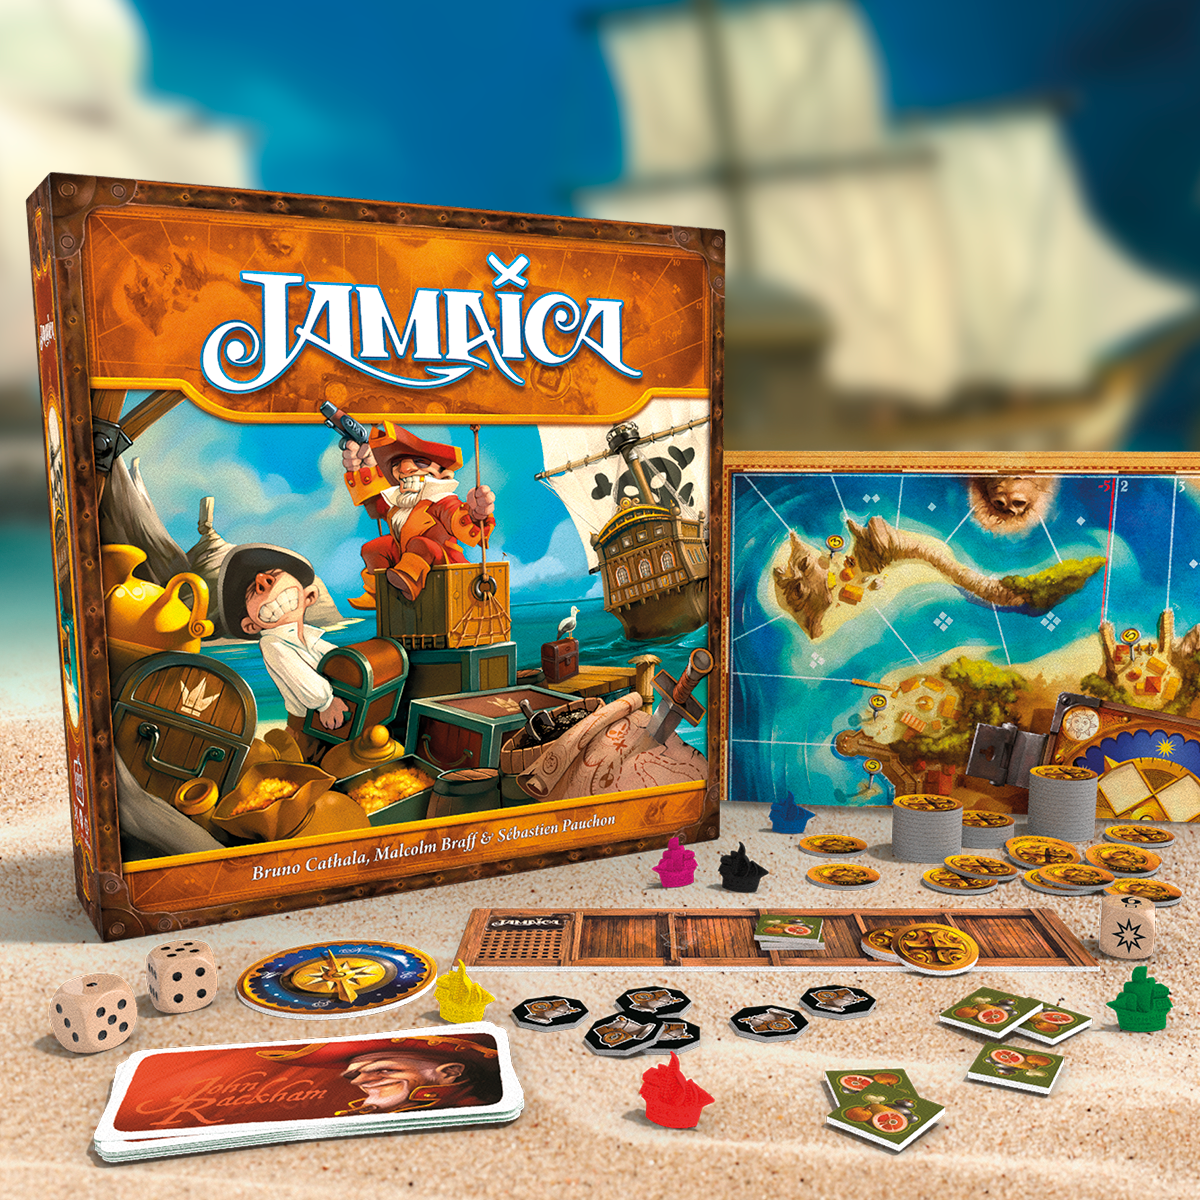 Jamaica - Revised Edition (November 26 Release)